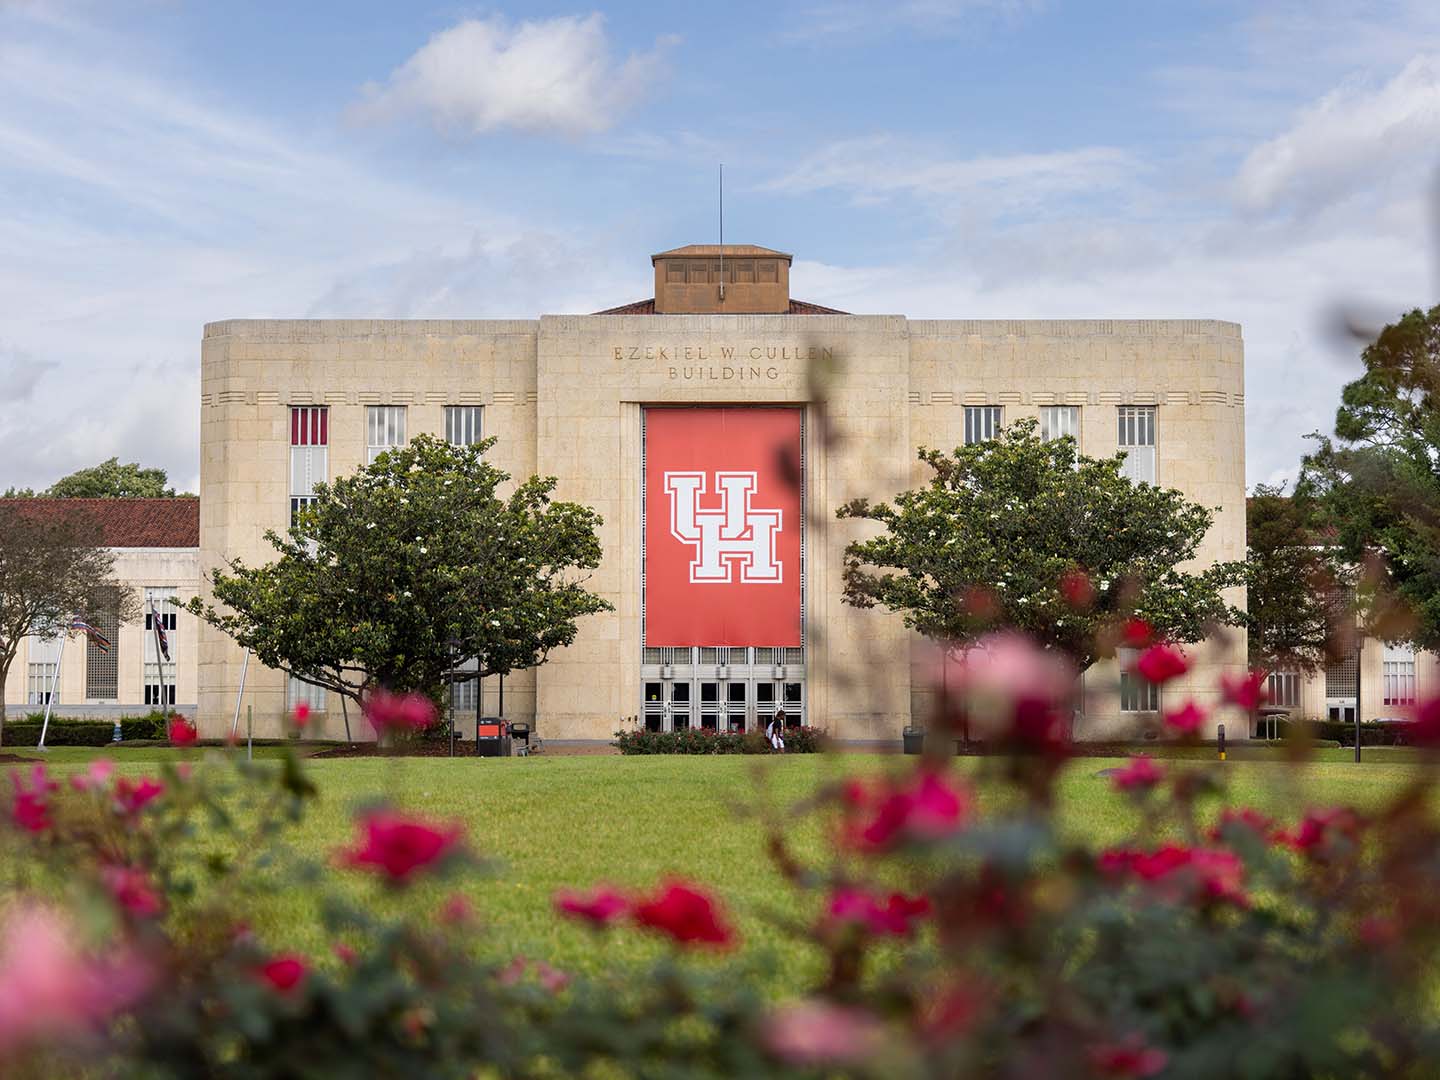 Cullen Performance Hall at the University of Houston with a large red UH banner and blue skies.